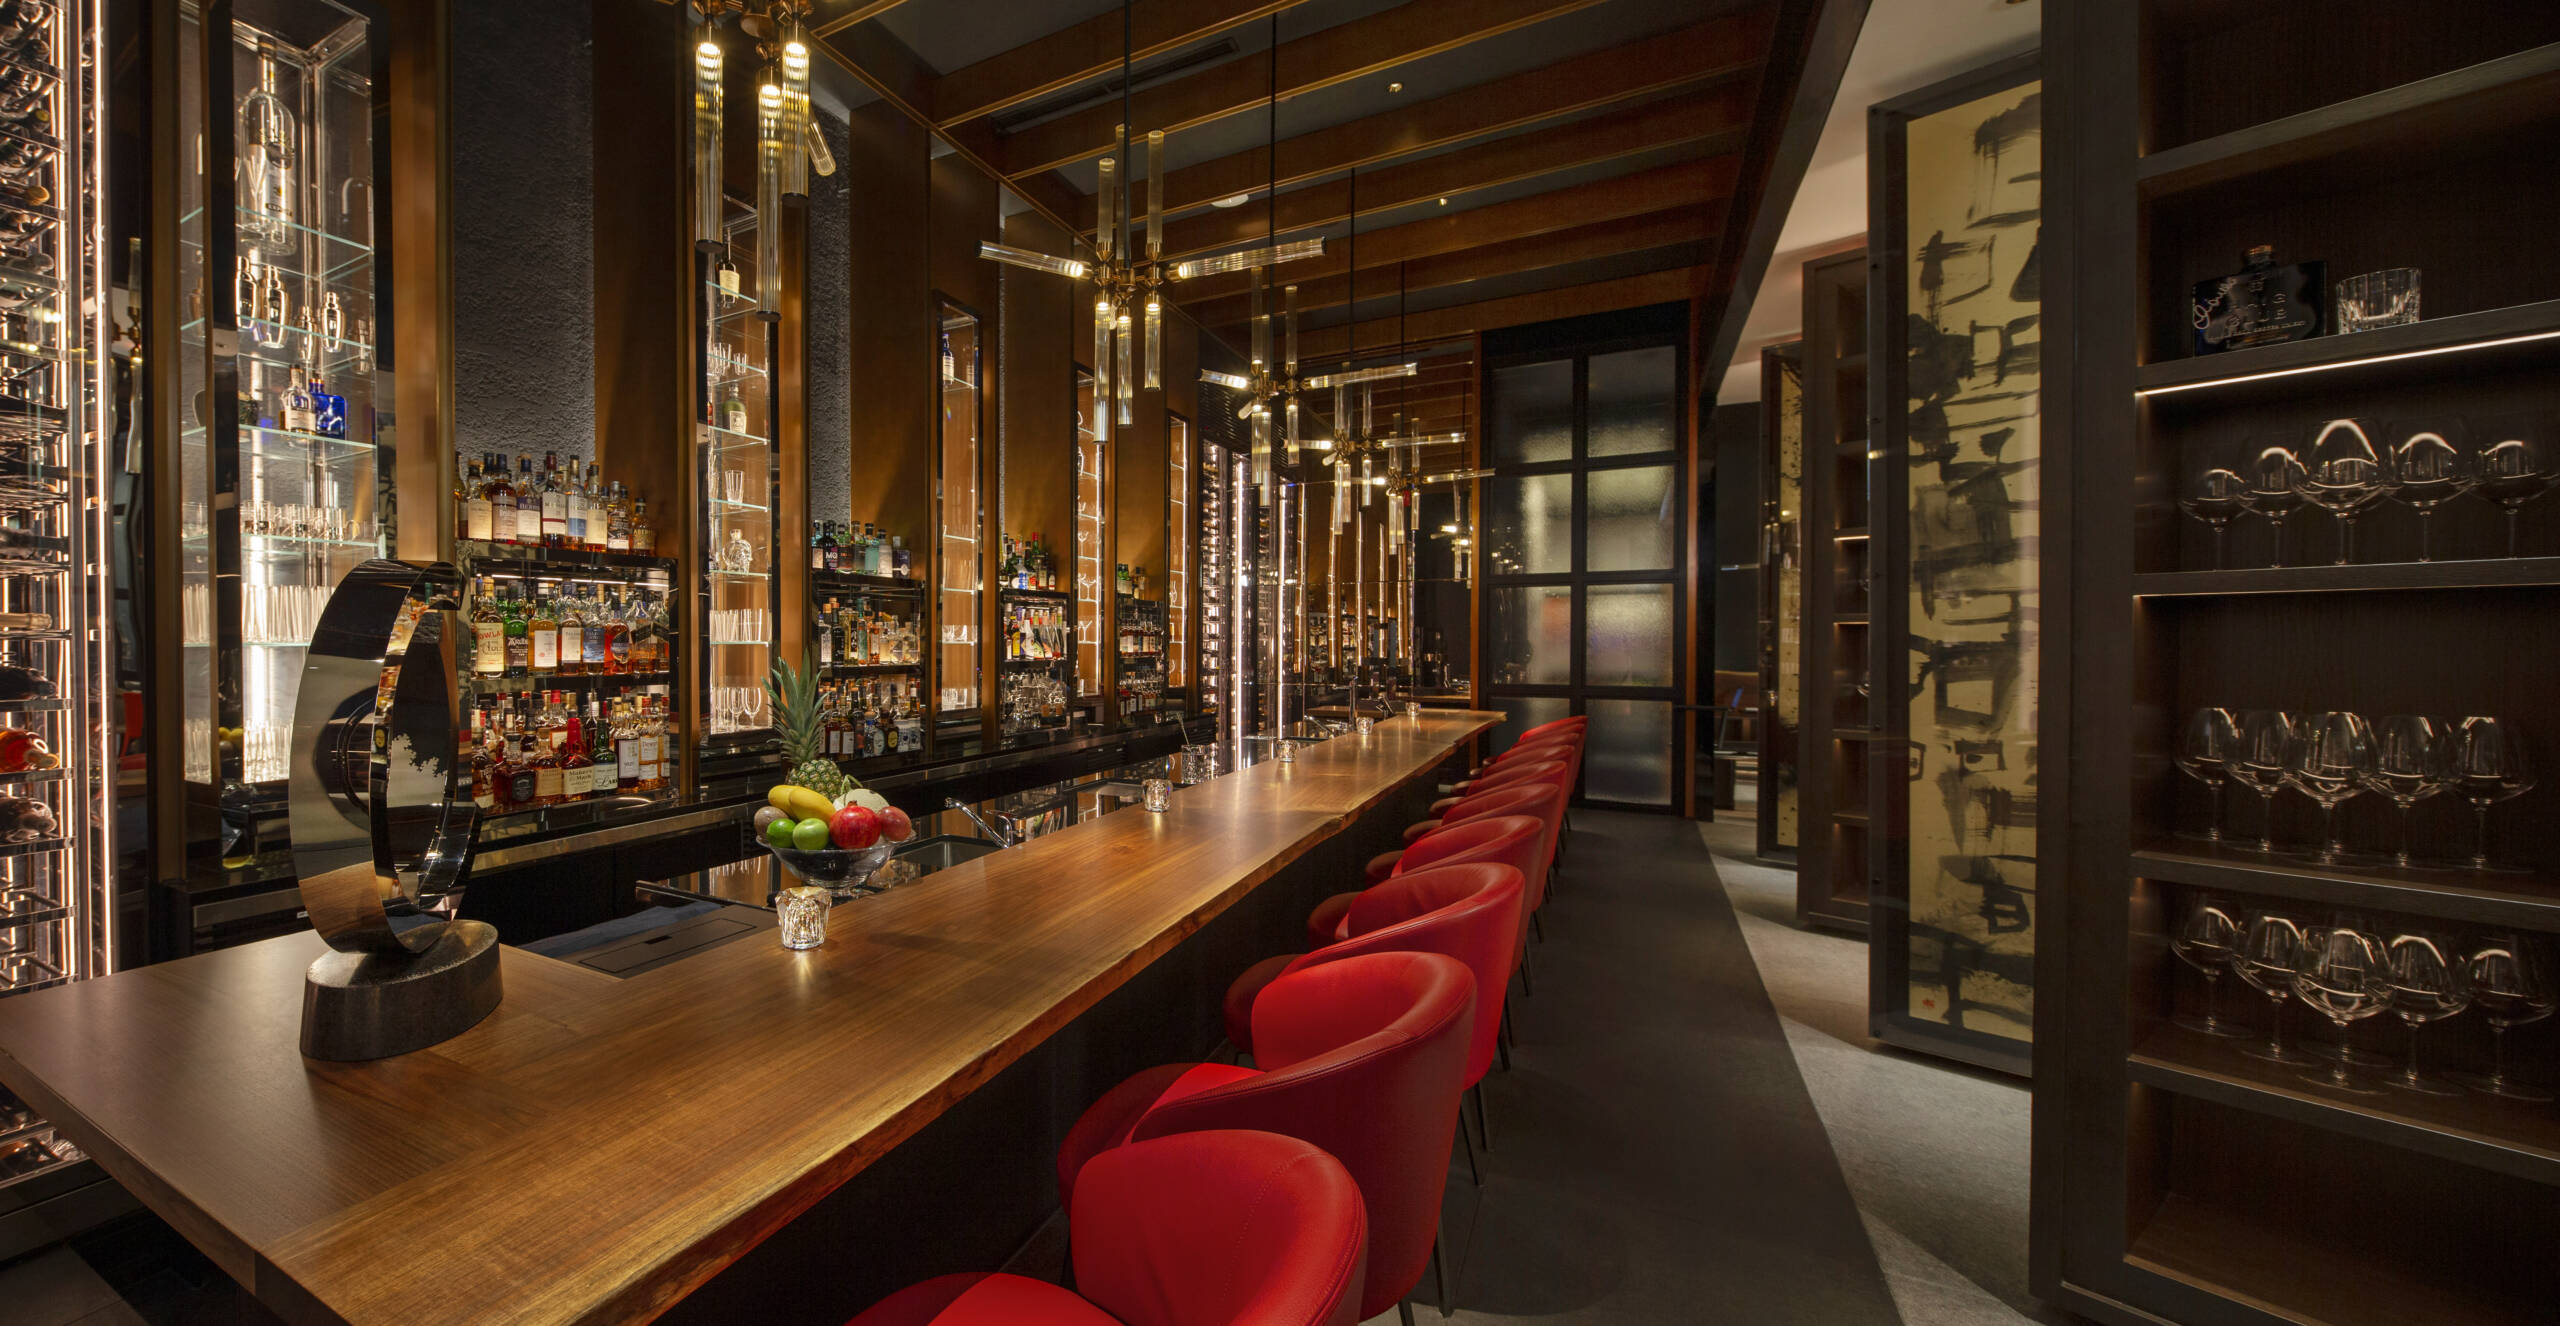 Stylish bar with red chairs